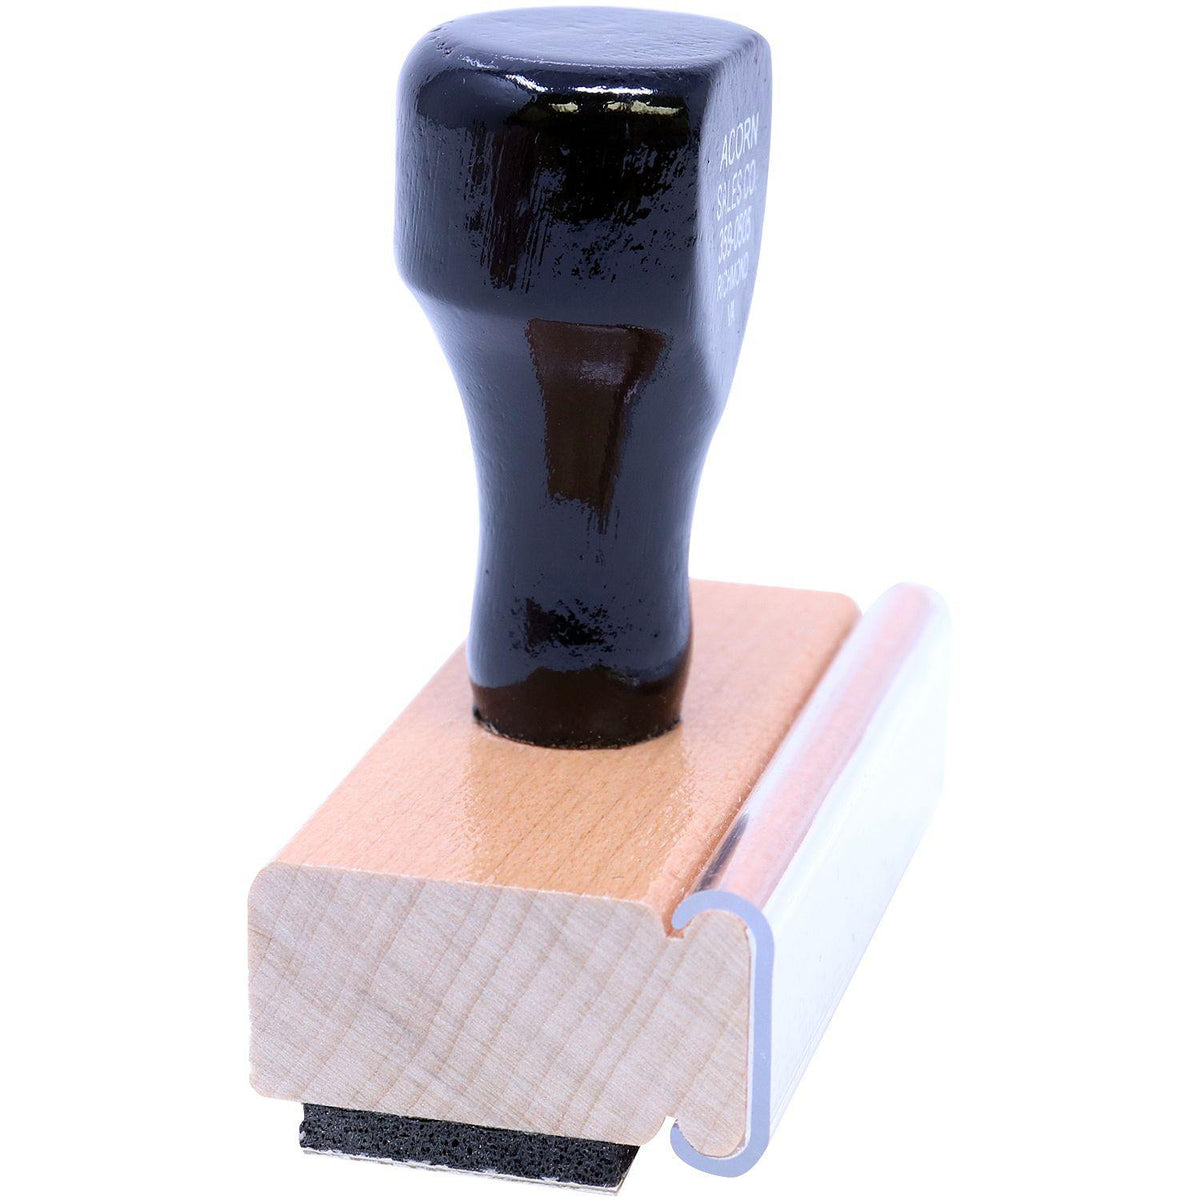 Side View of Benefits Assigned Rubber Stamp at an Angle